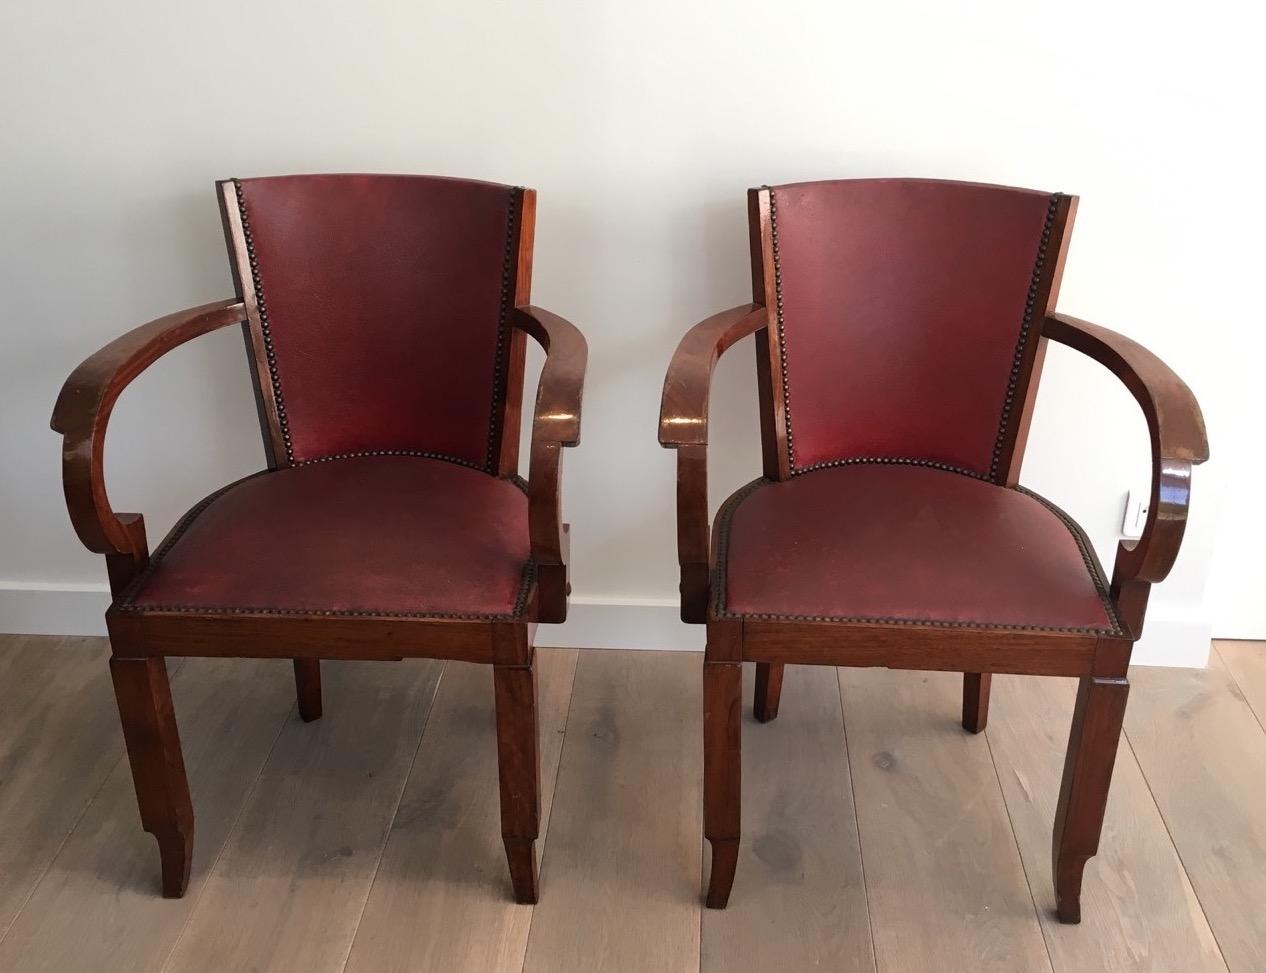 Mid-20th Century Rare Set of 8 Mahogany and Faux-Leather Art Deco Armchairs, French, circa 1930 For Sale